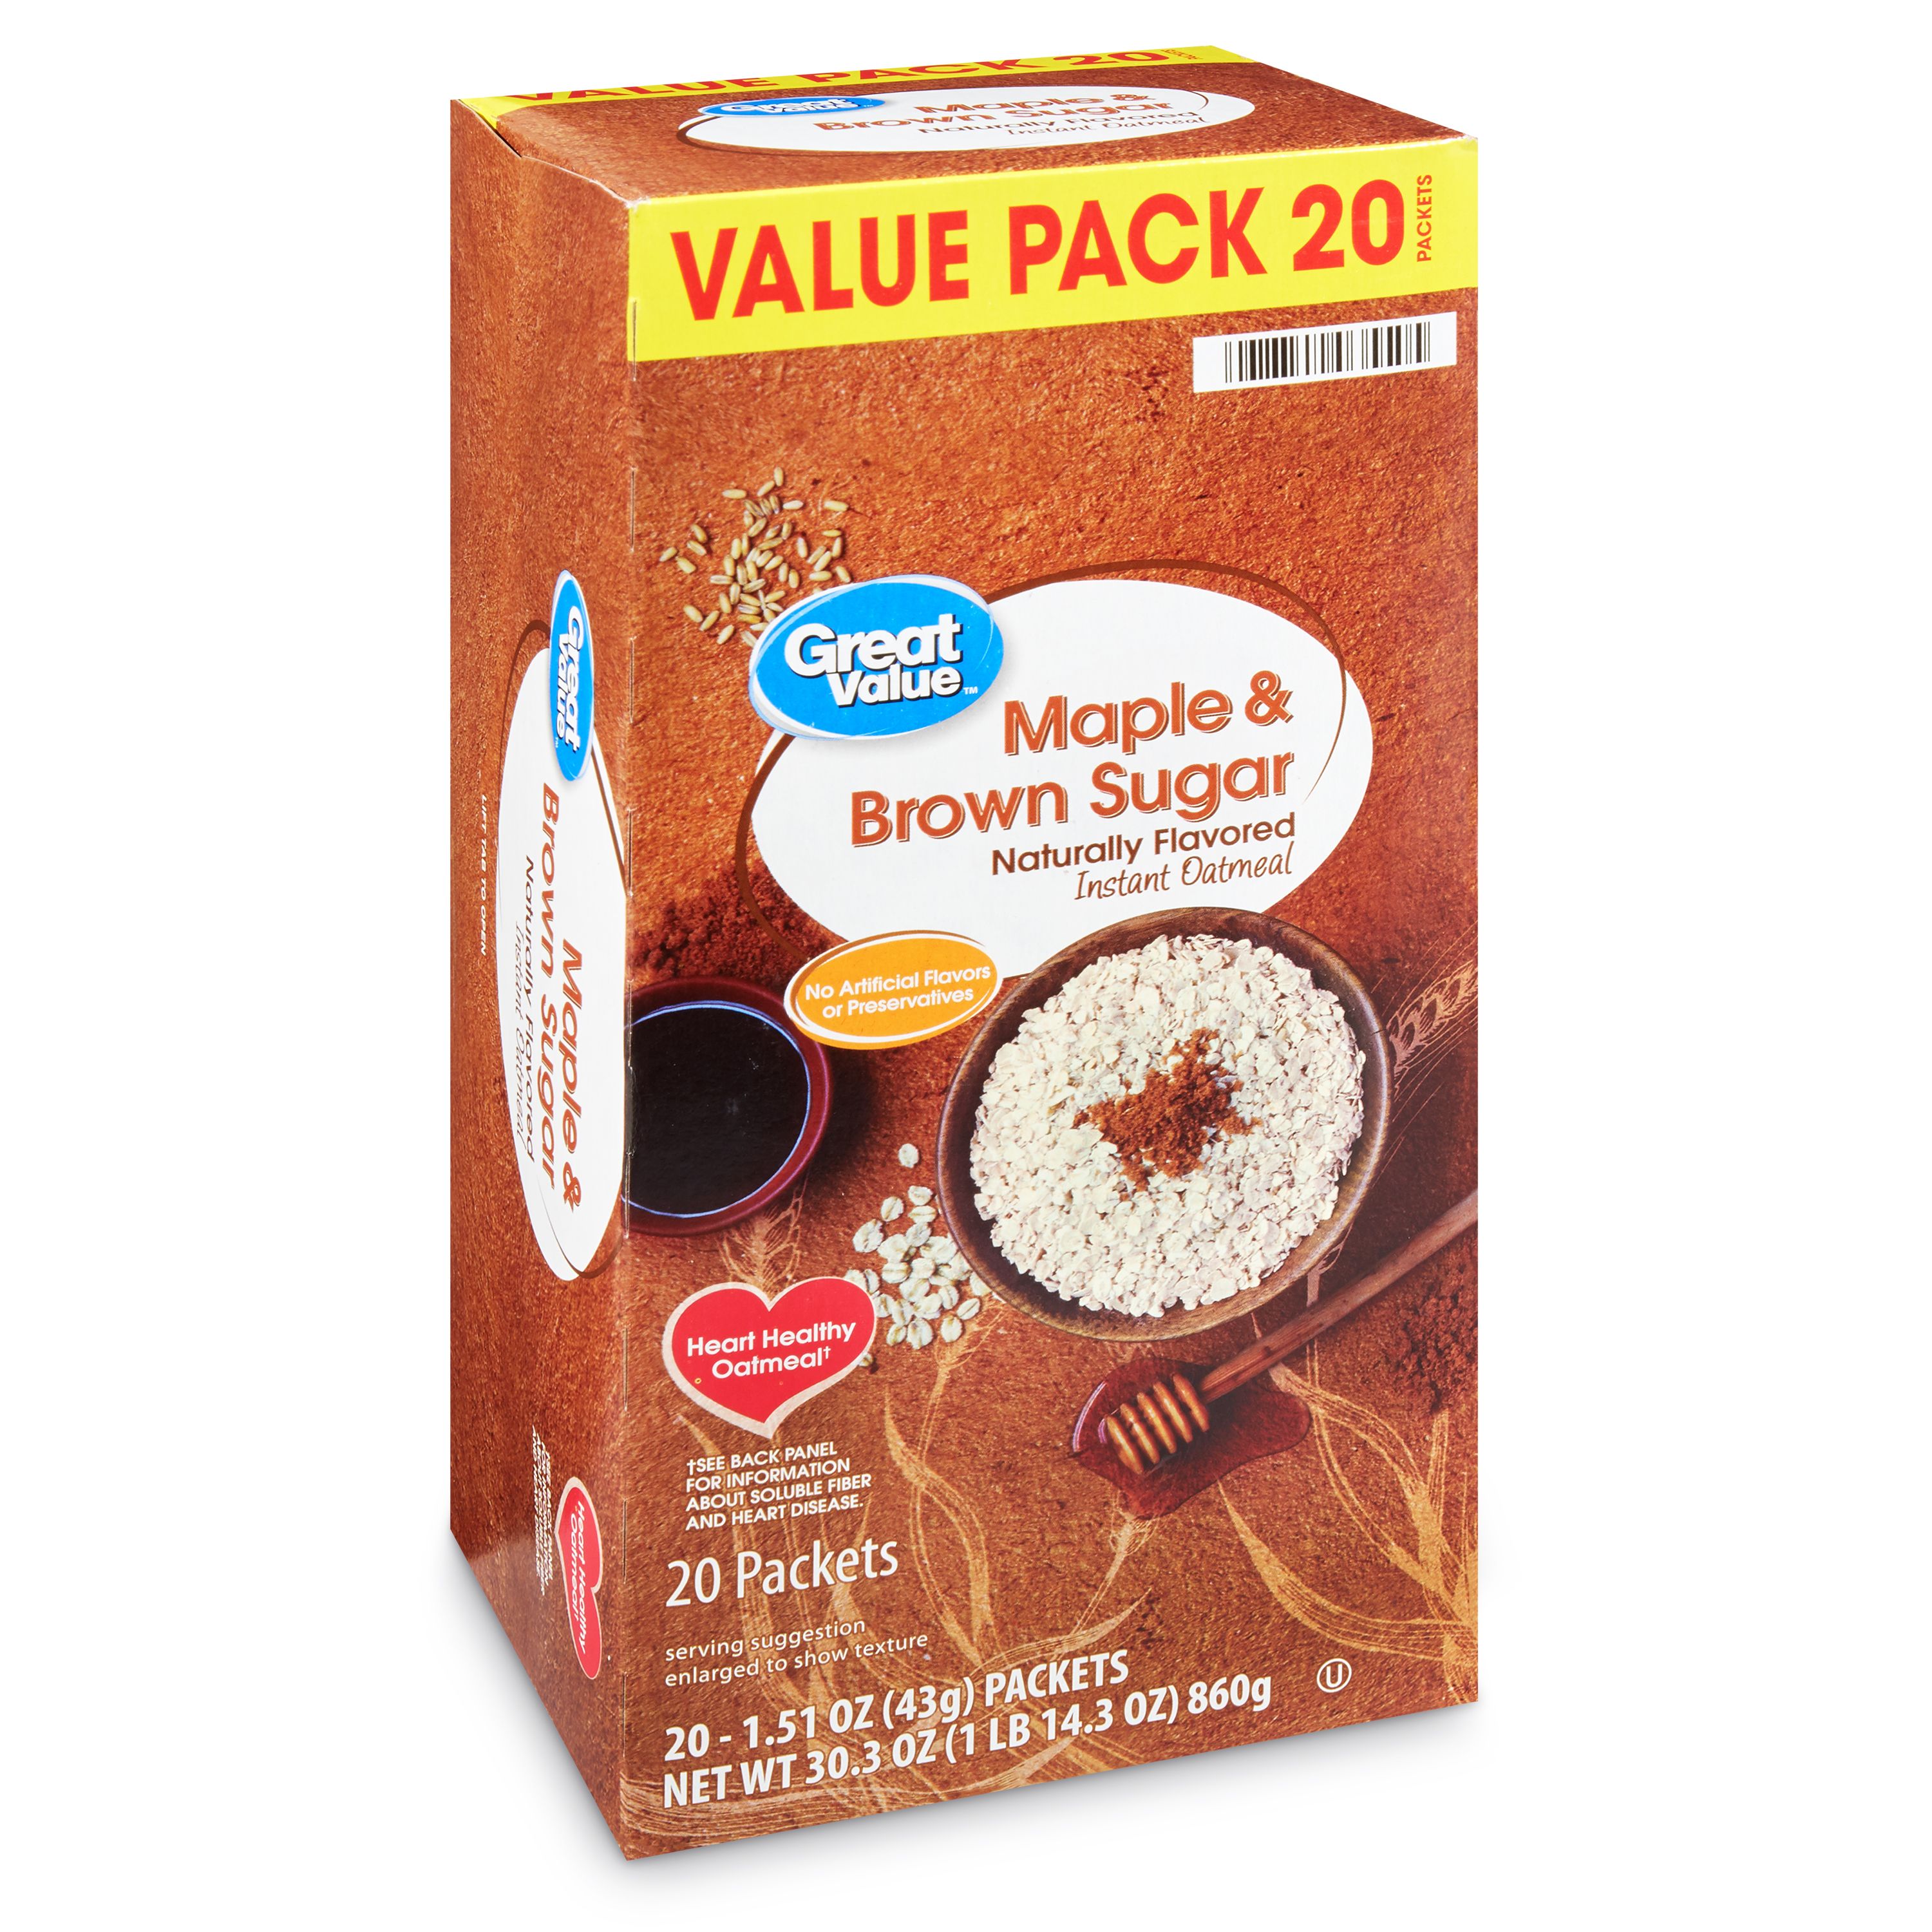 Great Value Instant Oatmeal, Maple & Brown Sugar Value Pack, 20 Packets Image